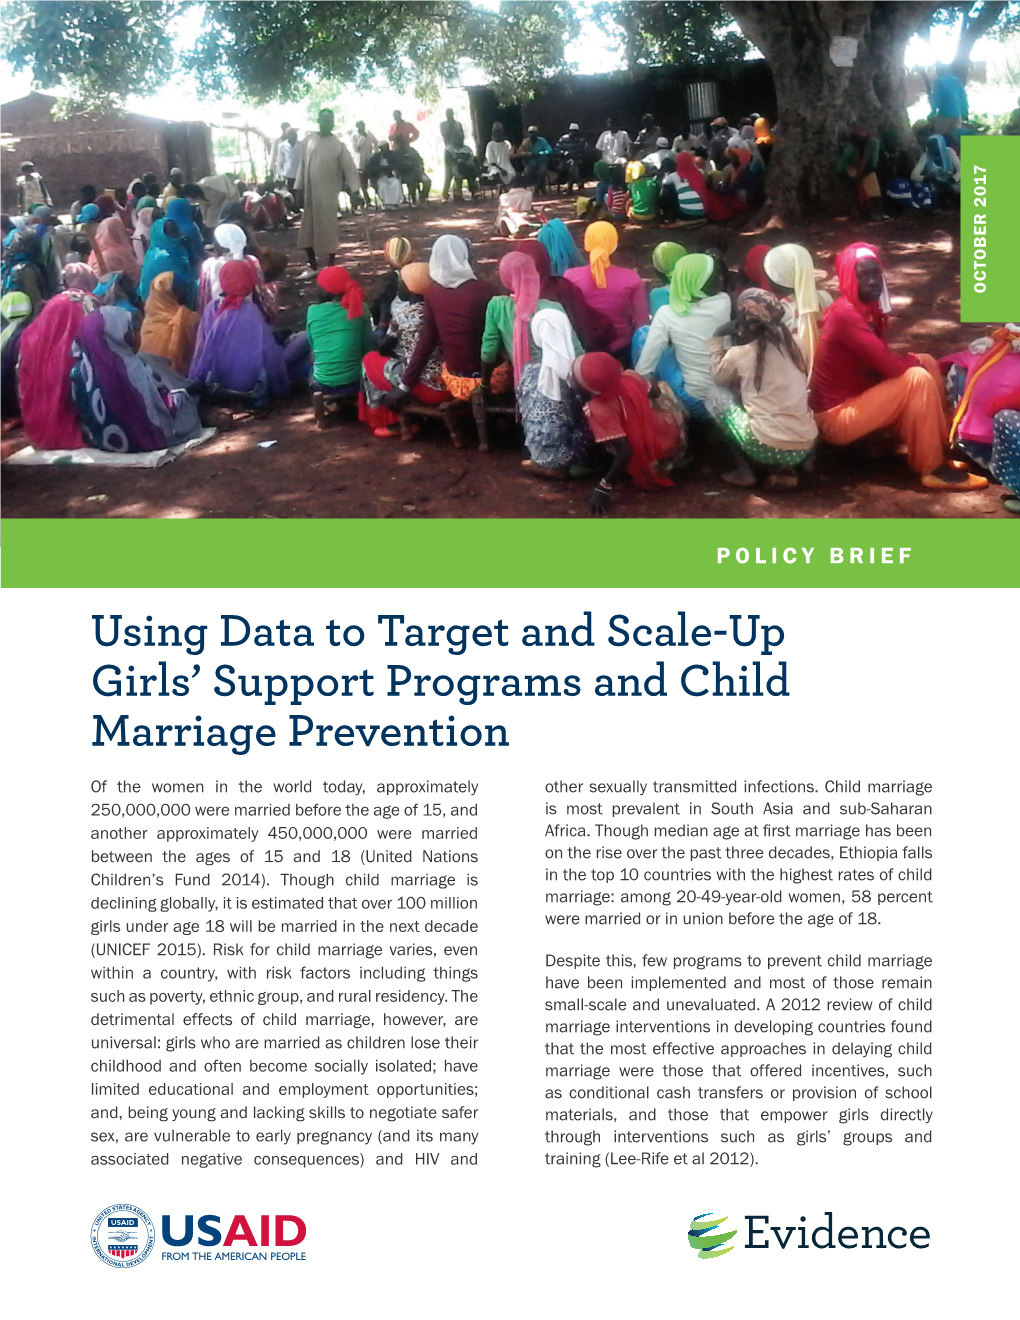 Using Data to Target and Scale-Up Girls' Support Programs and Child Marriage Prevention